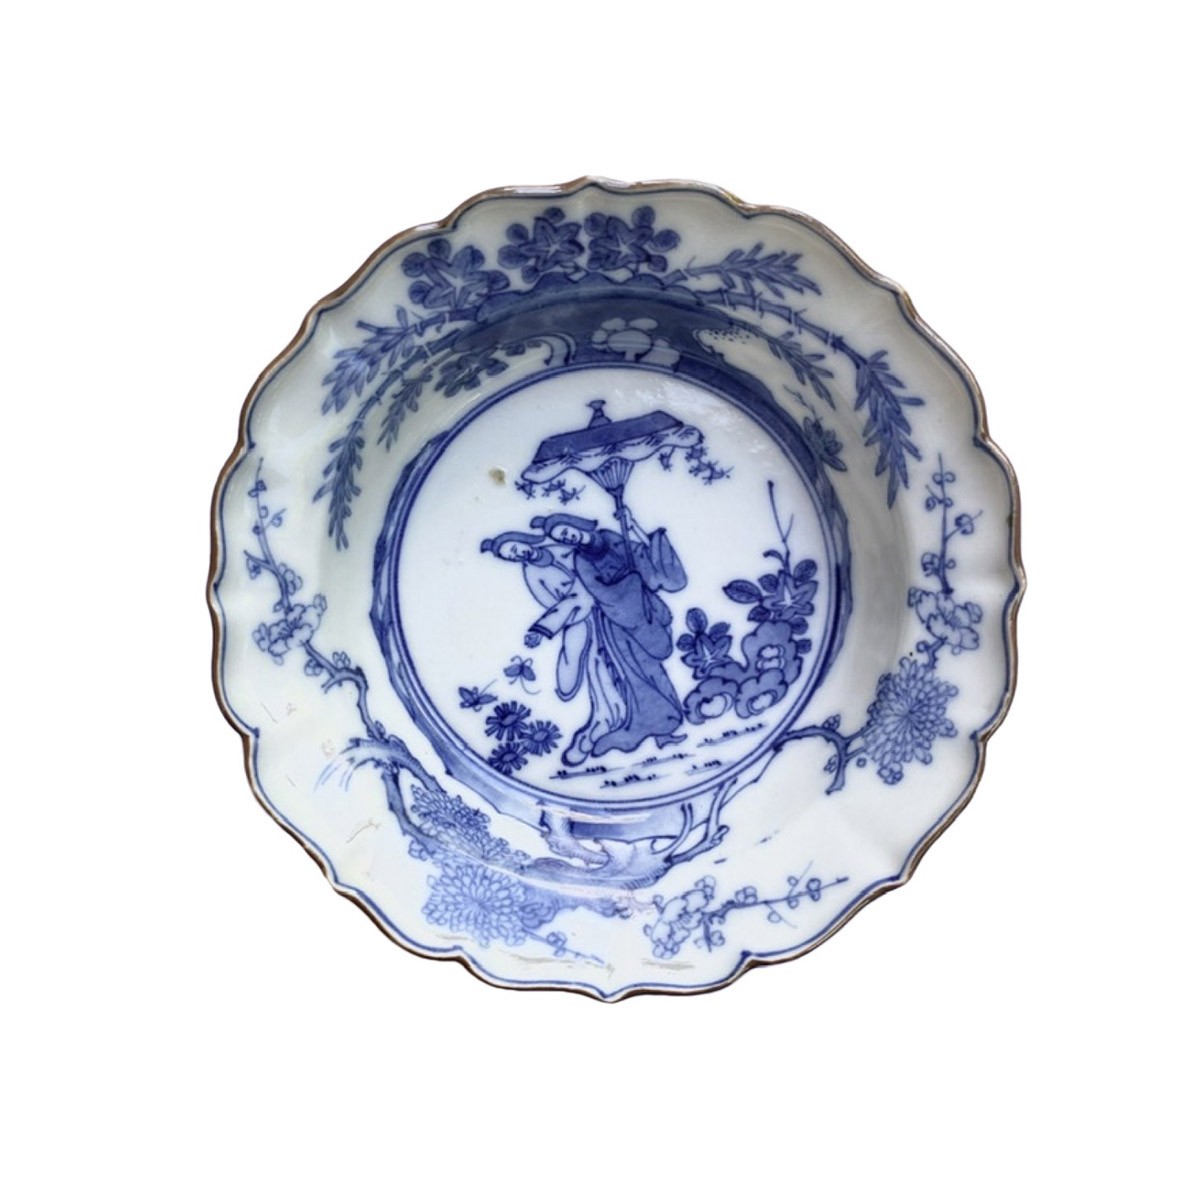 A Japanese Blue And White Porcelain Flat Bowl C 1690 1740 Ref 80701,Landscaping Backyard Ideas With Pool